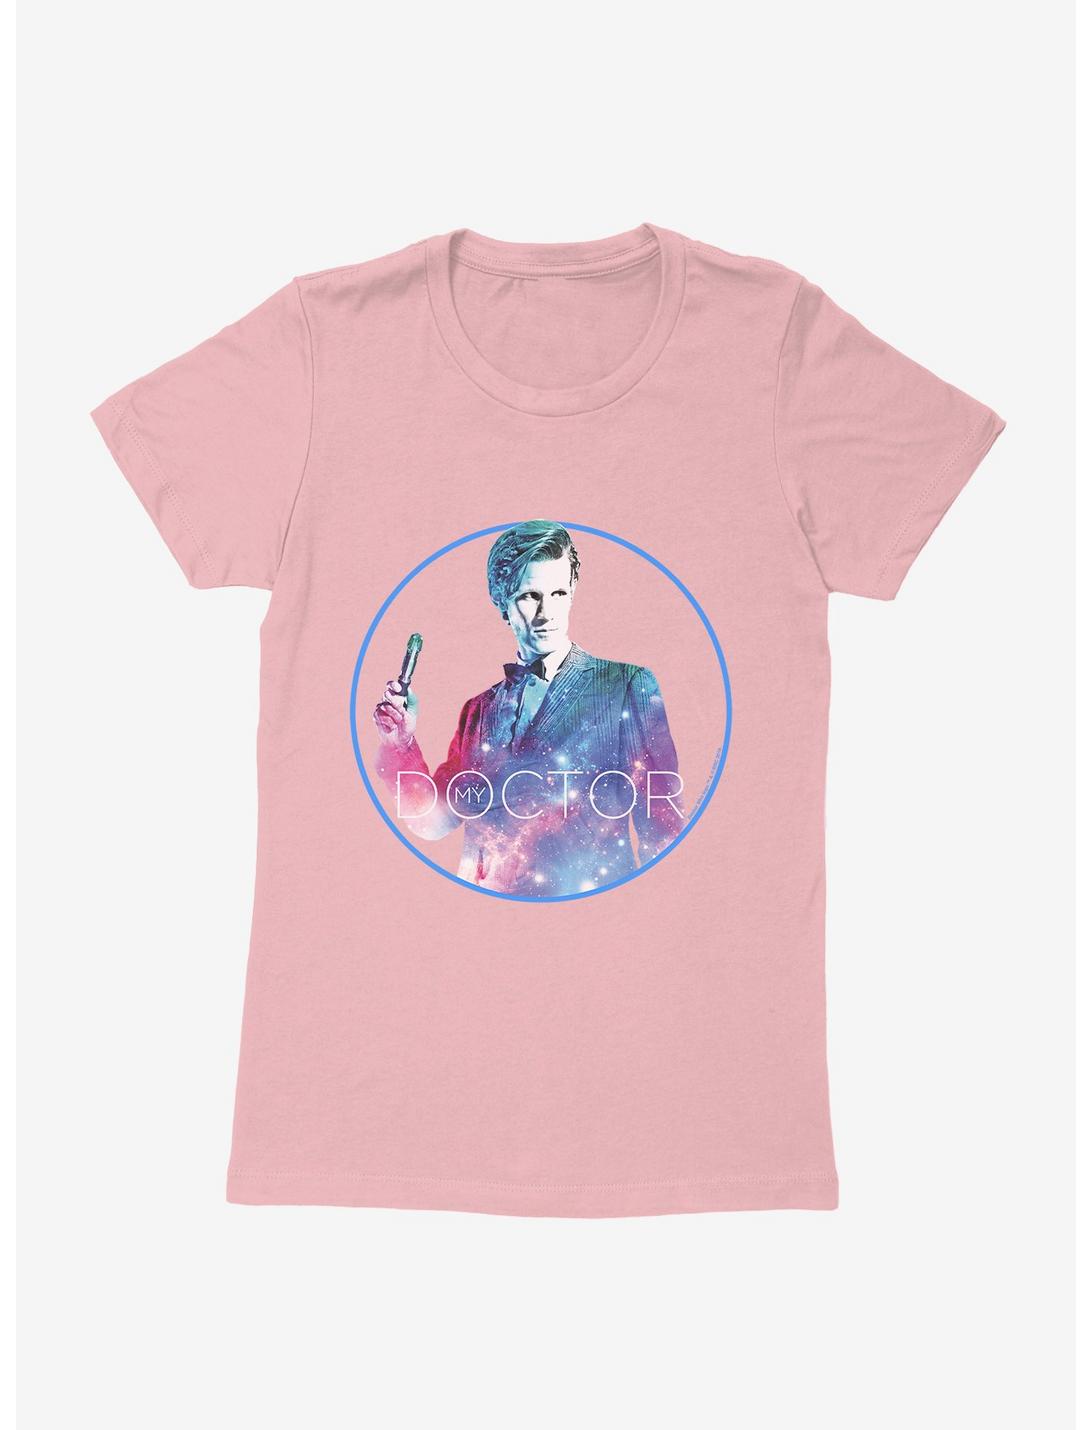 Doctor Who The Eleventh Doctor My Doctor Womens T-Shirt, LIGHT PINK, hi-res